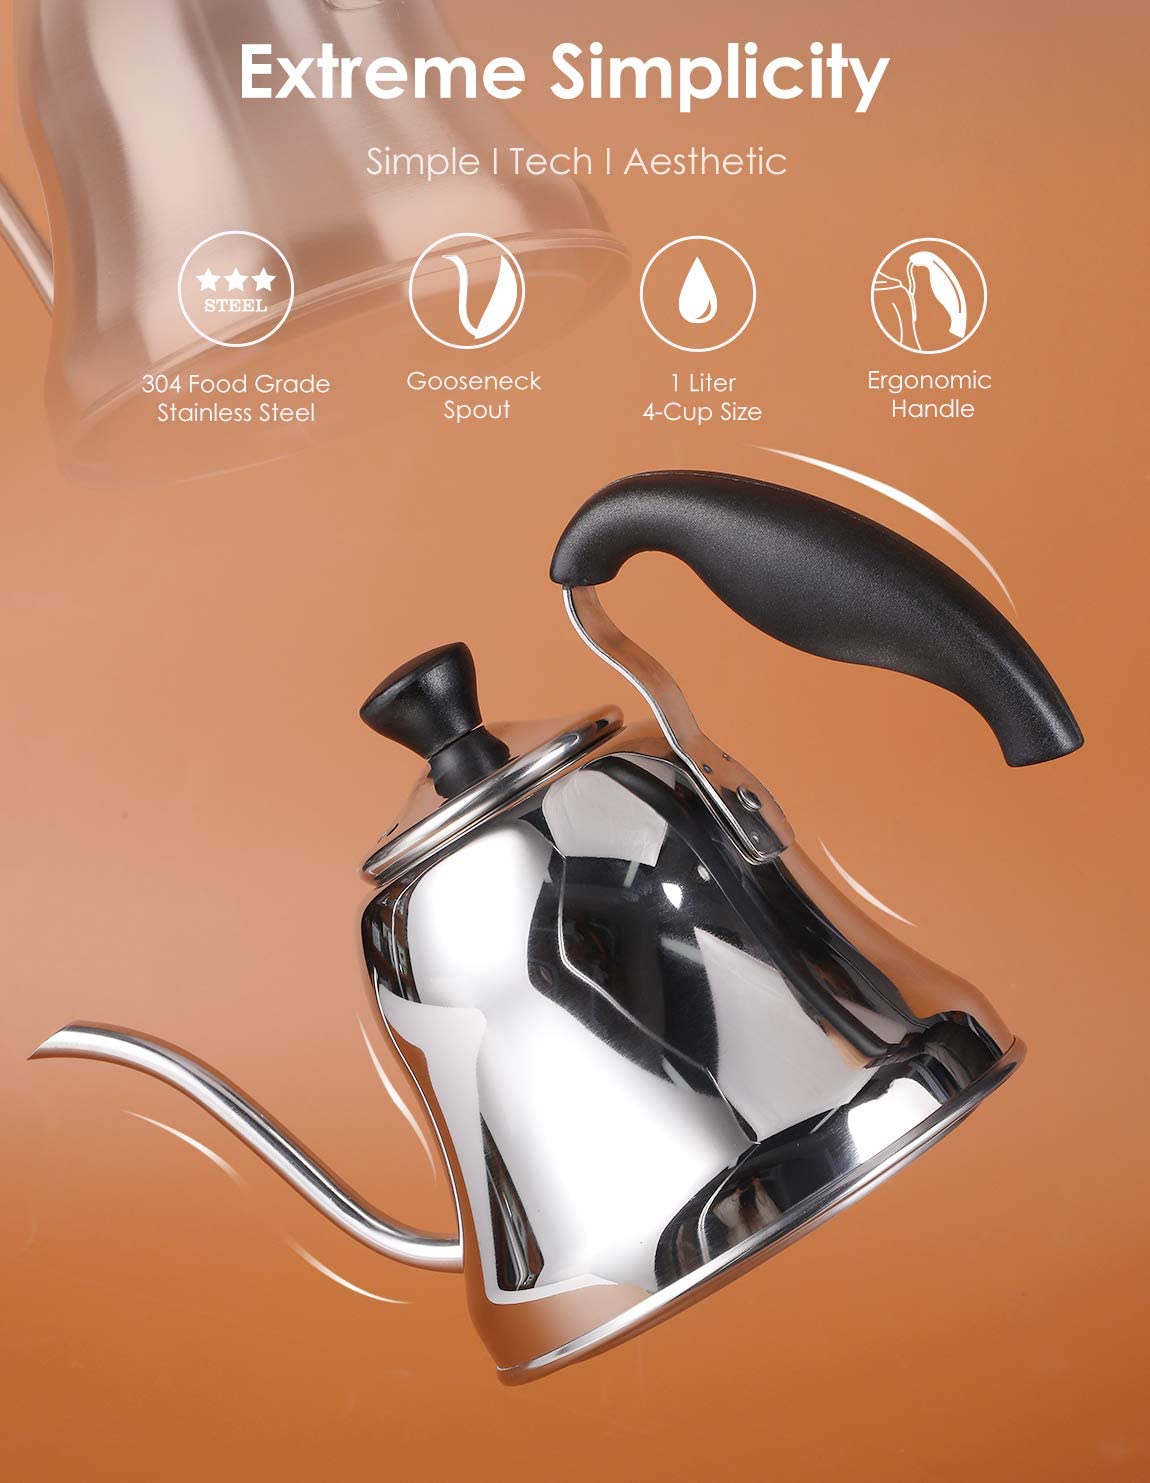 Chefbar Tea Kettle Gooseneck Coffee Kettle Pour Over Coffee Kettle, Stovetop for